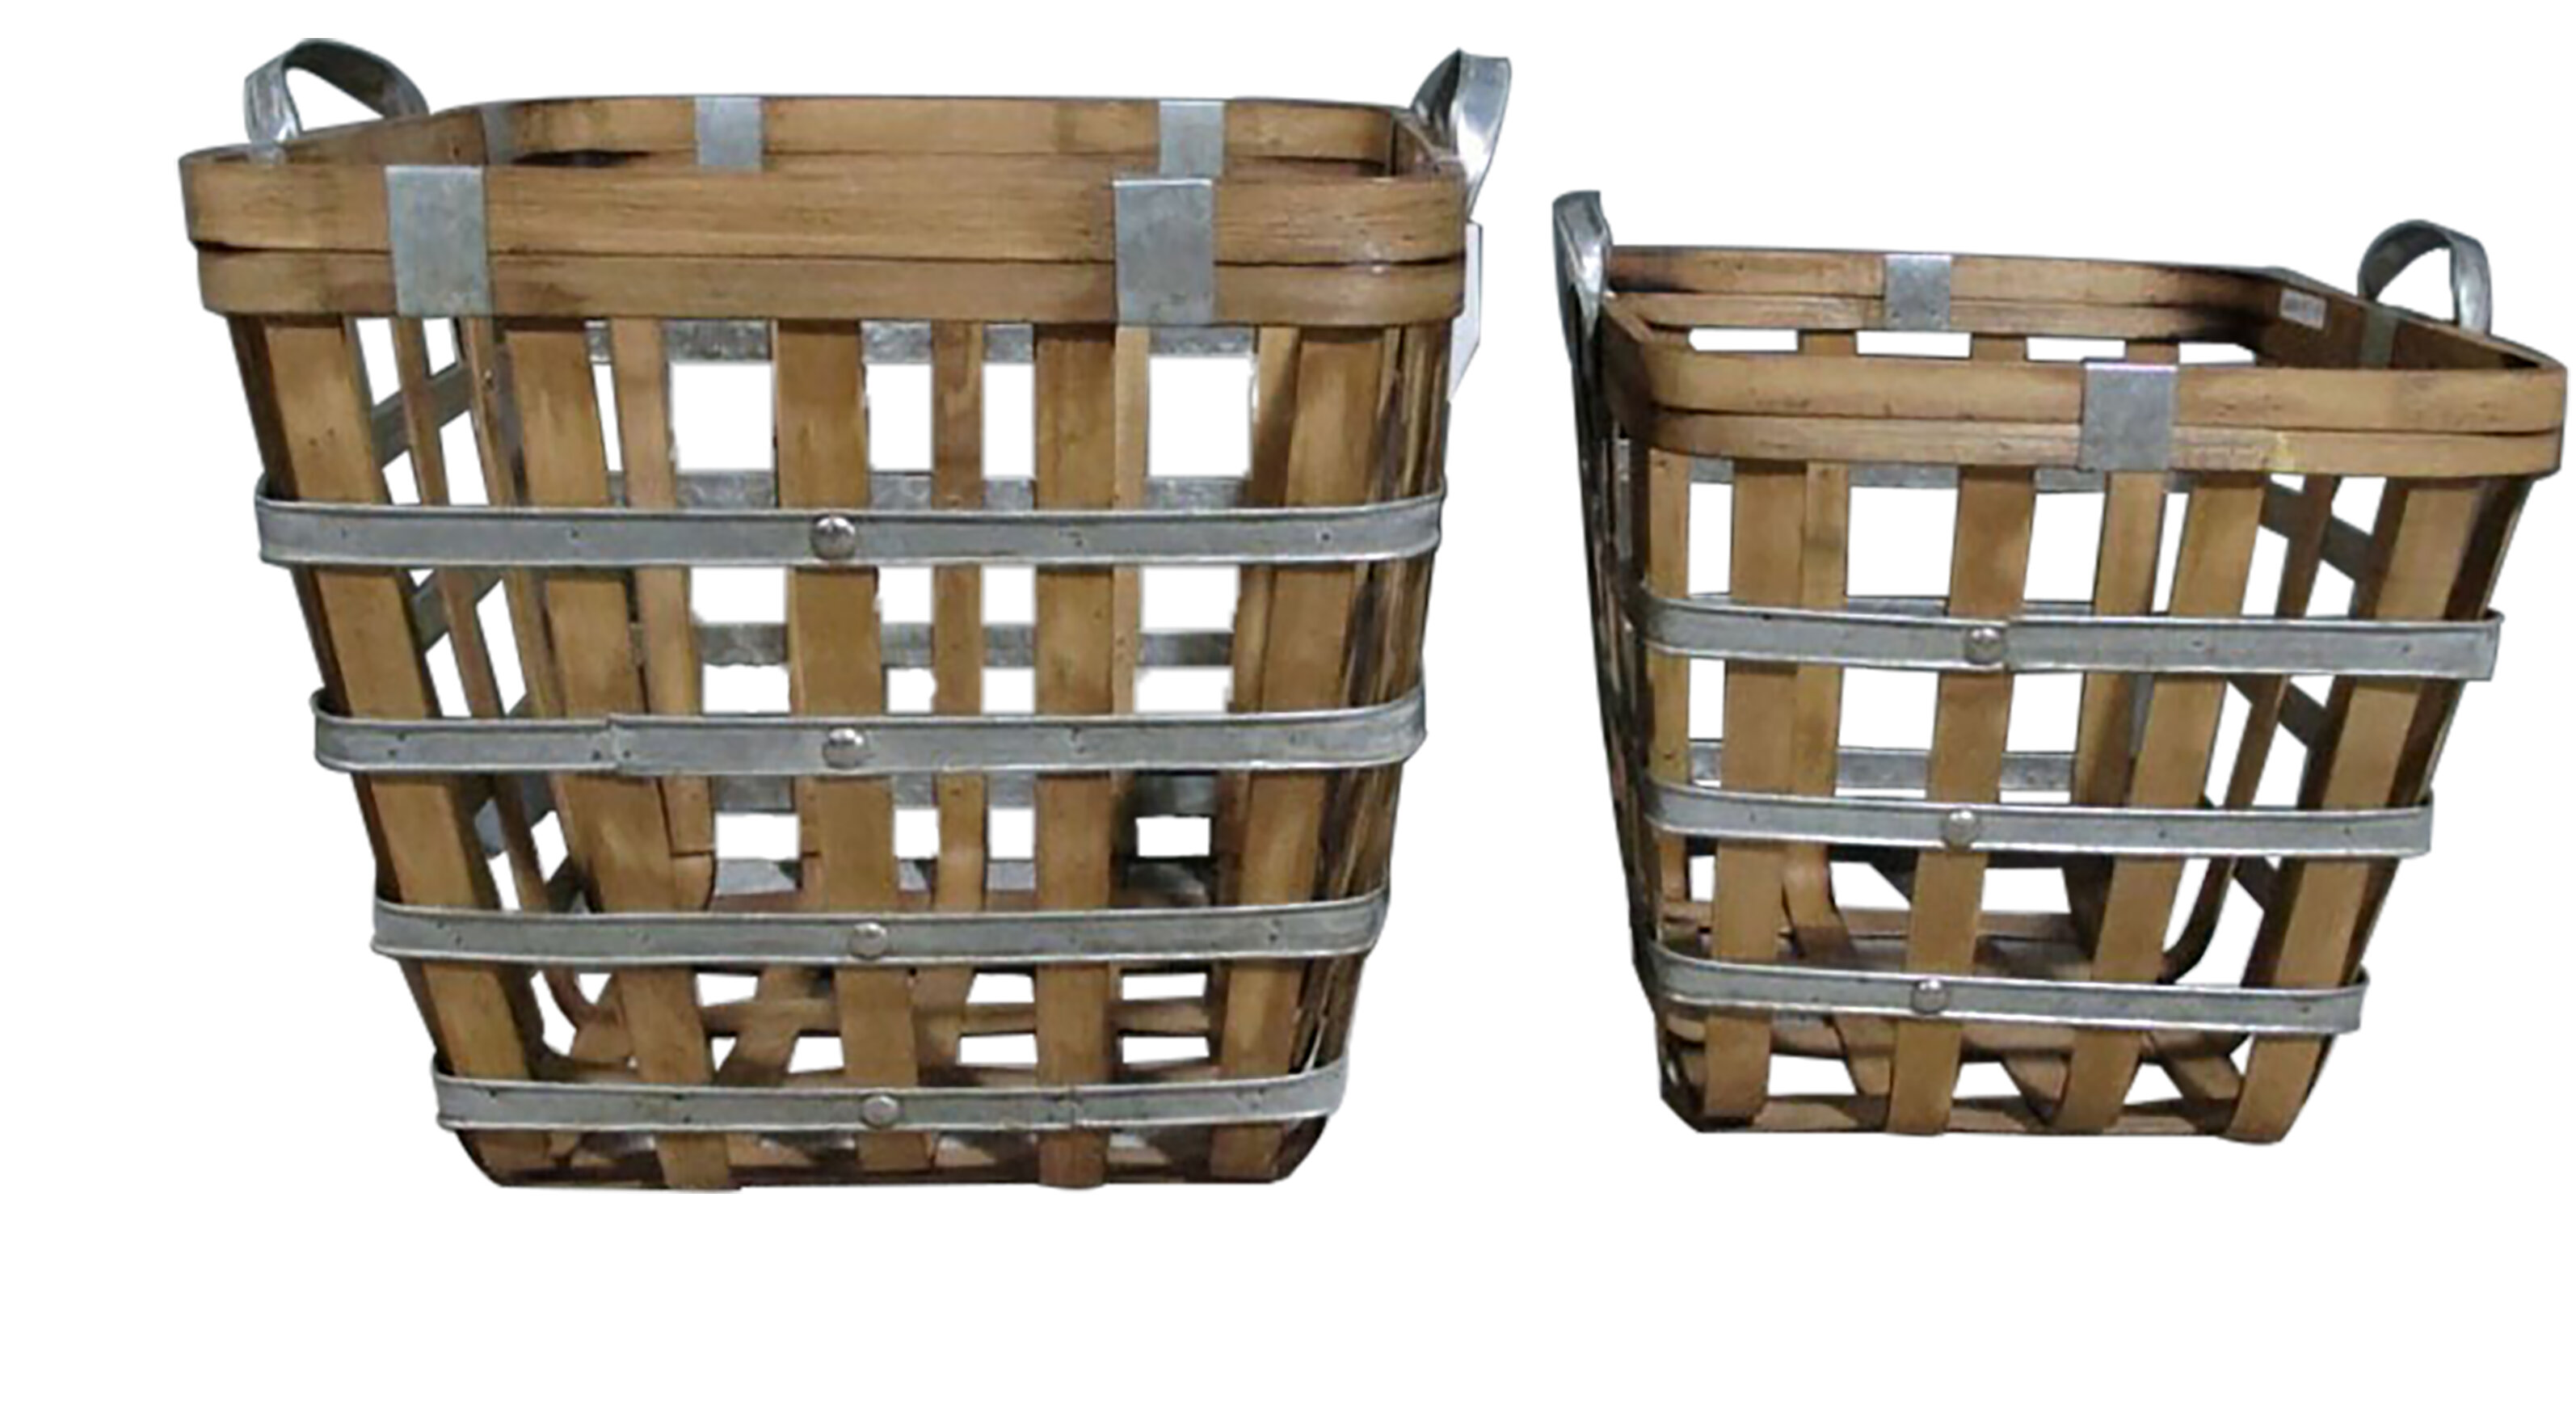 square woven baskets